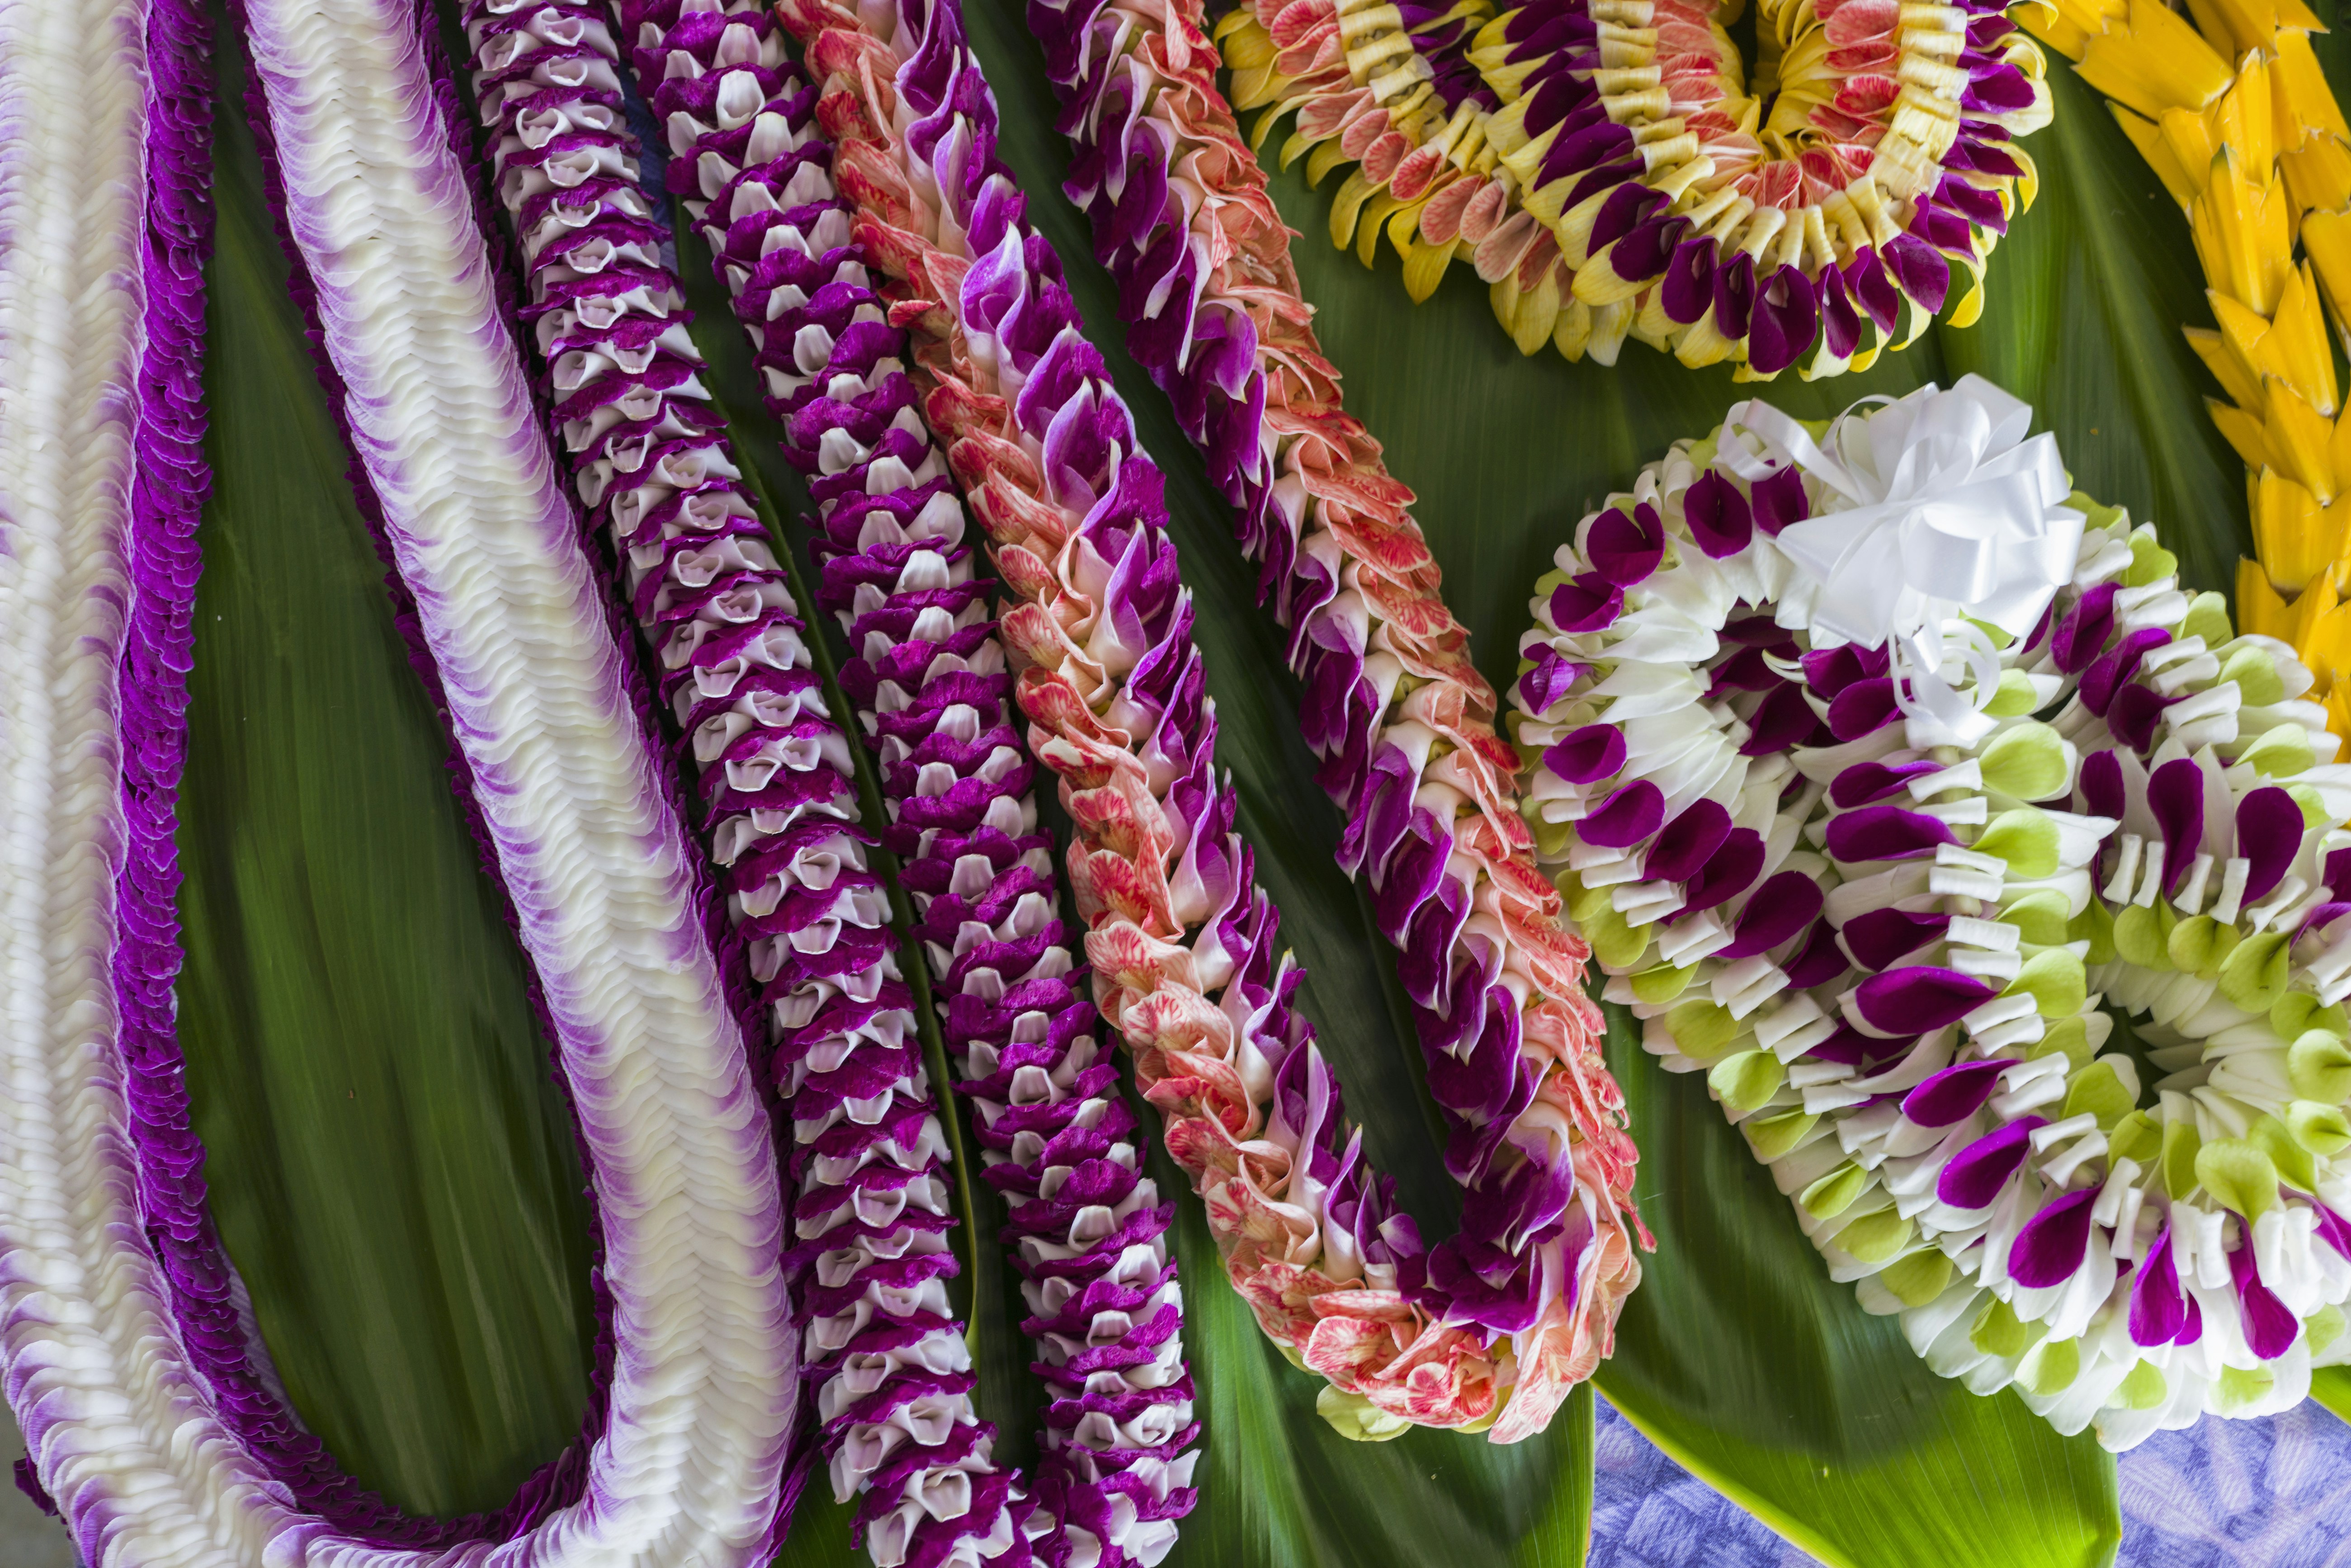 Leis, or necklaces, made of purple and white flowers are displayed for sale